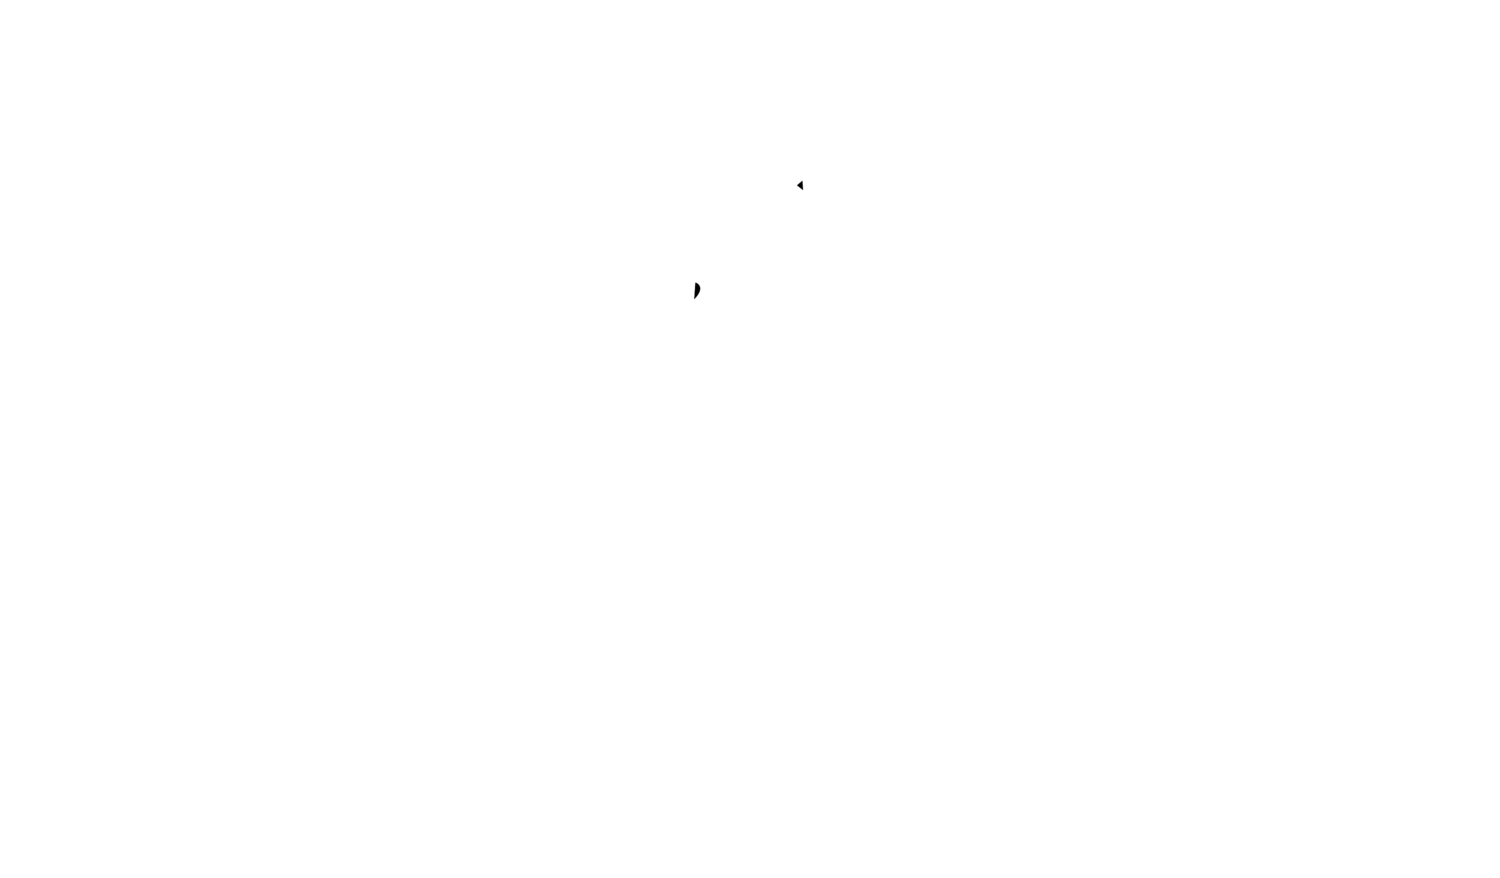 Cooper Gulch Common Grounds